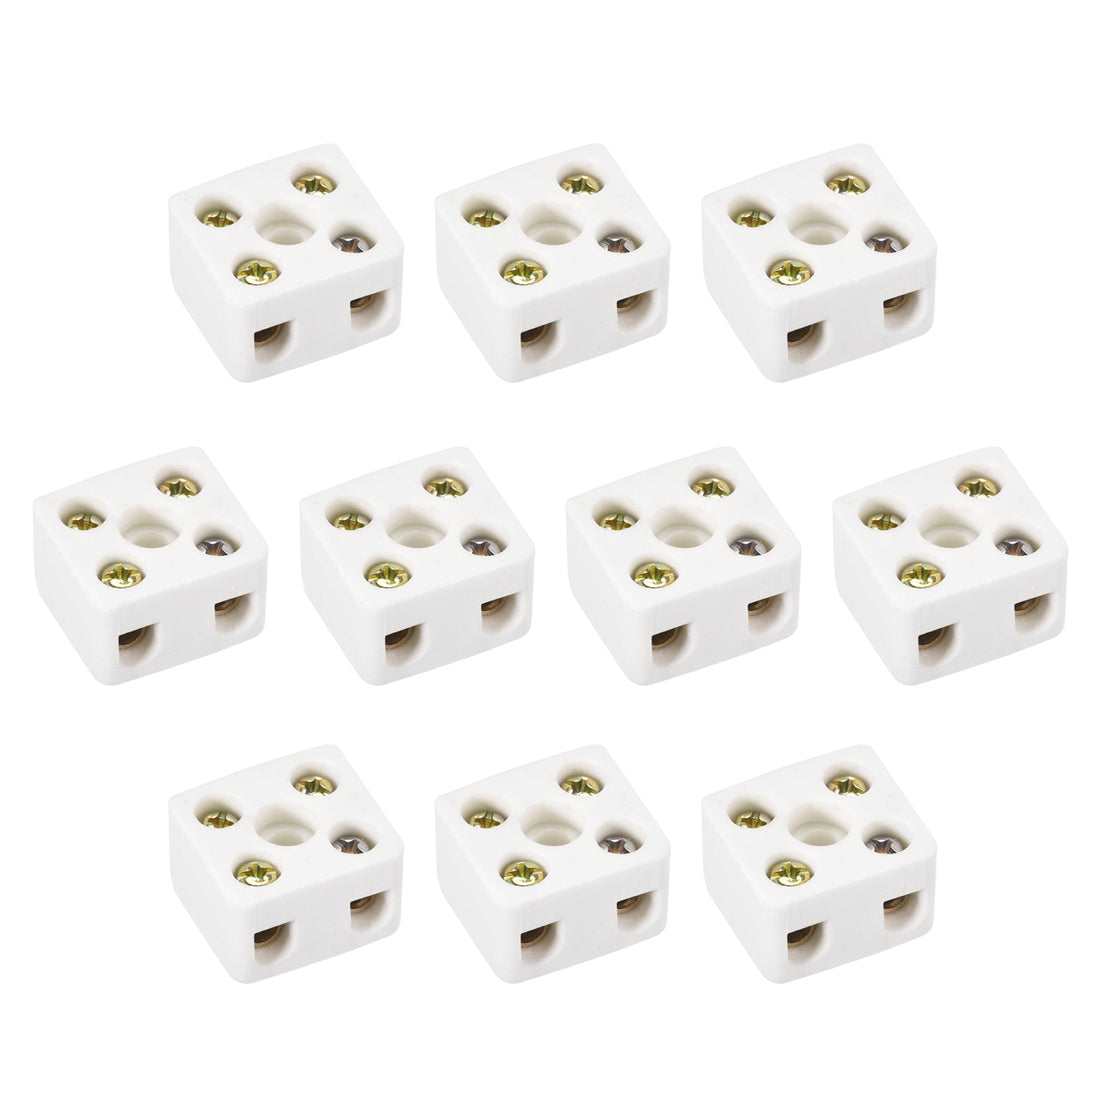 uxcell Uxcell 2 Way Ceramics Terminal Blocks High Temp Porcelain Ceramic Connectors 21.5x19.5x14.2mm for Electrical Wire Cable 10 Pcs